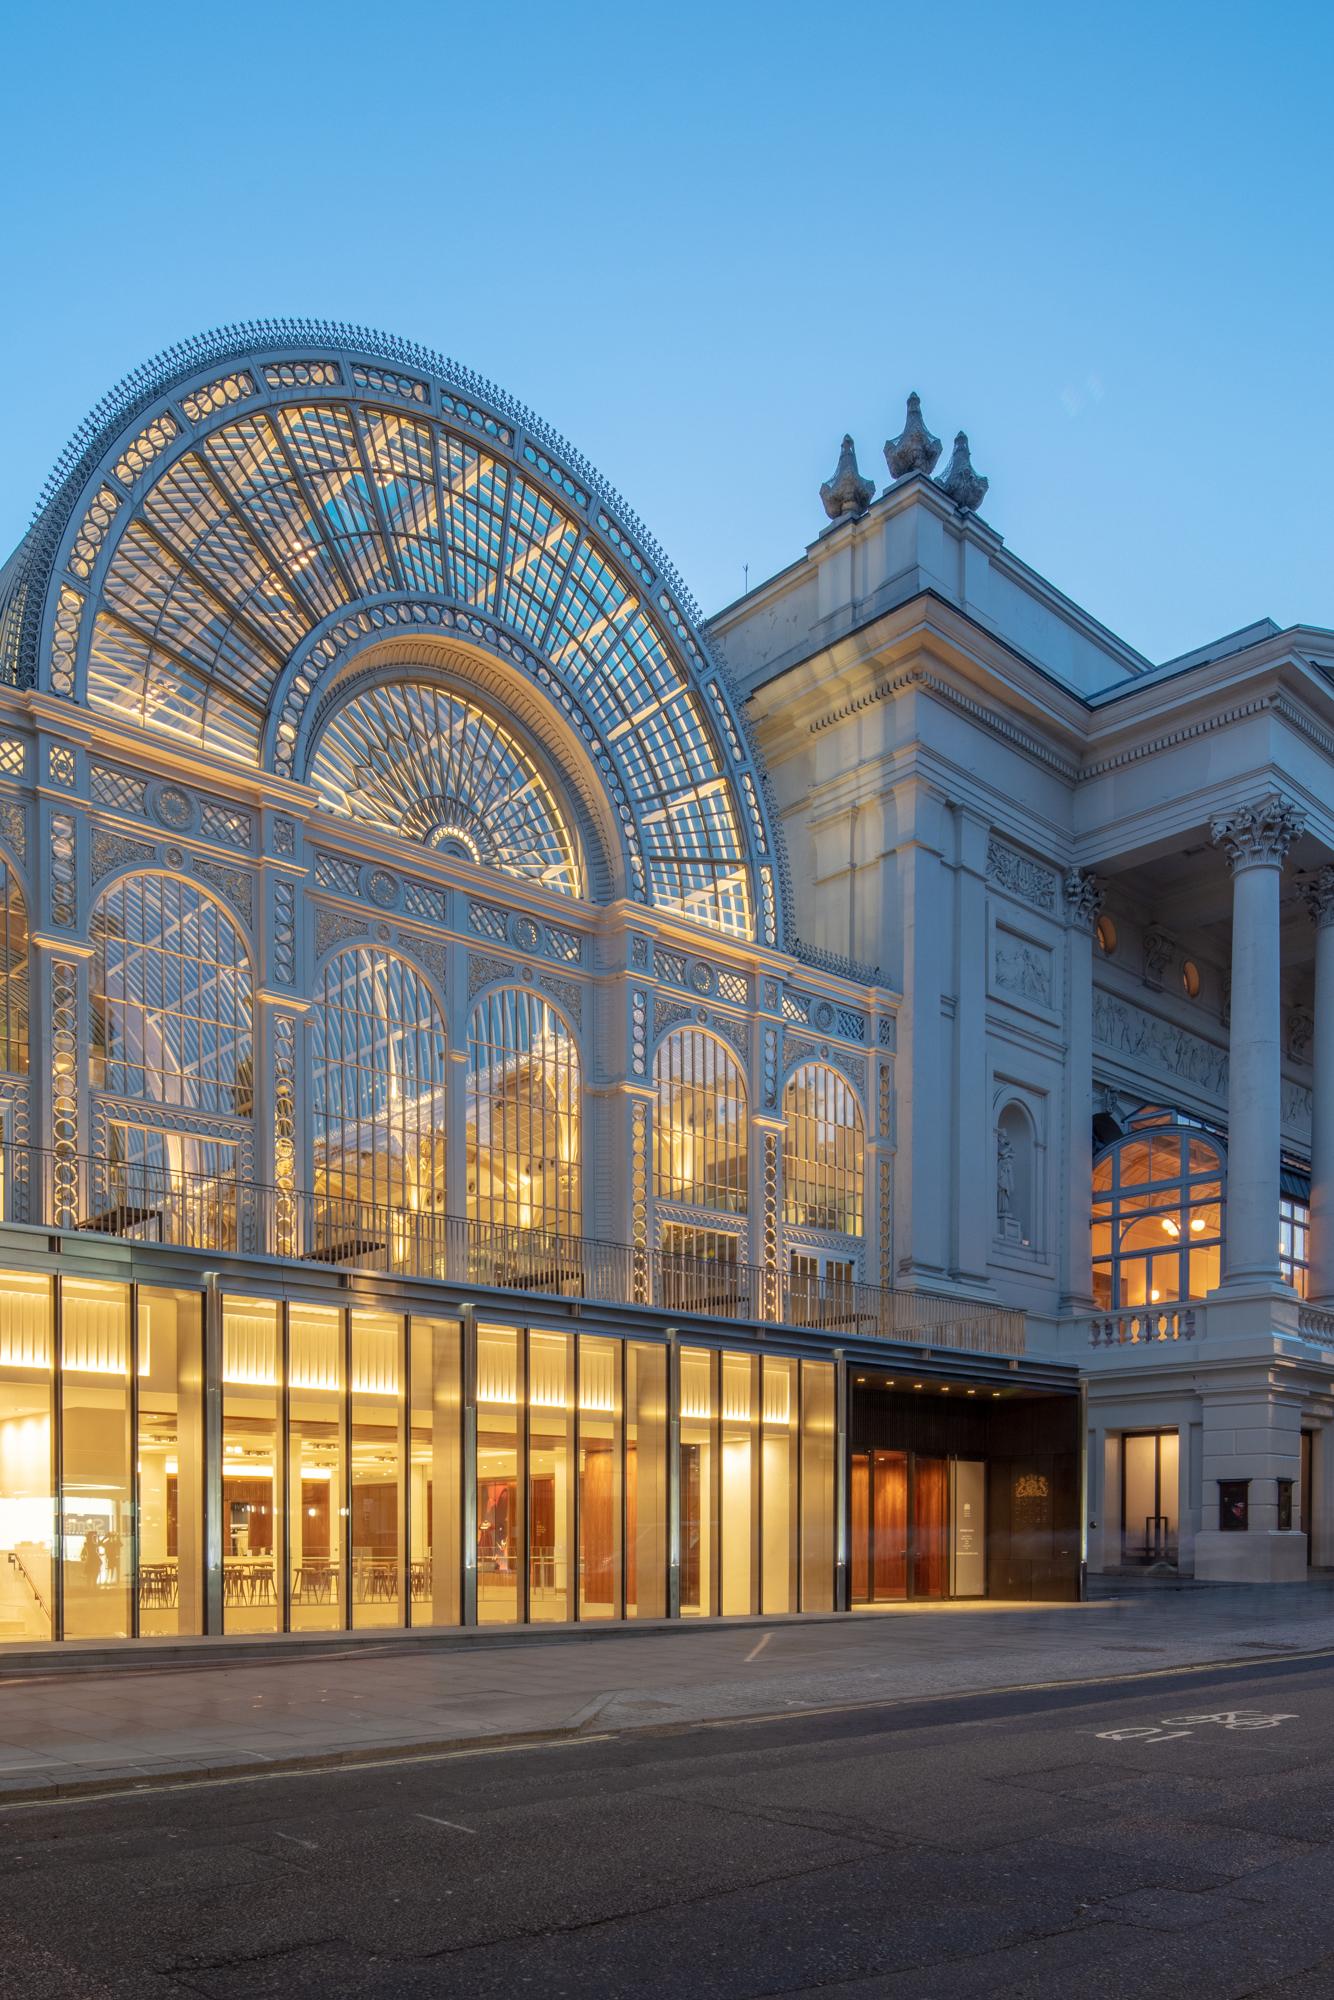 Exterior view of the Royal Opera House